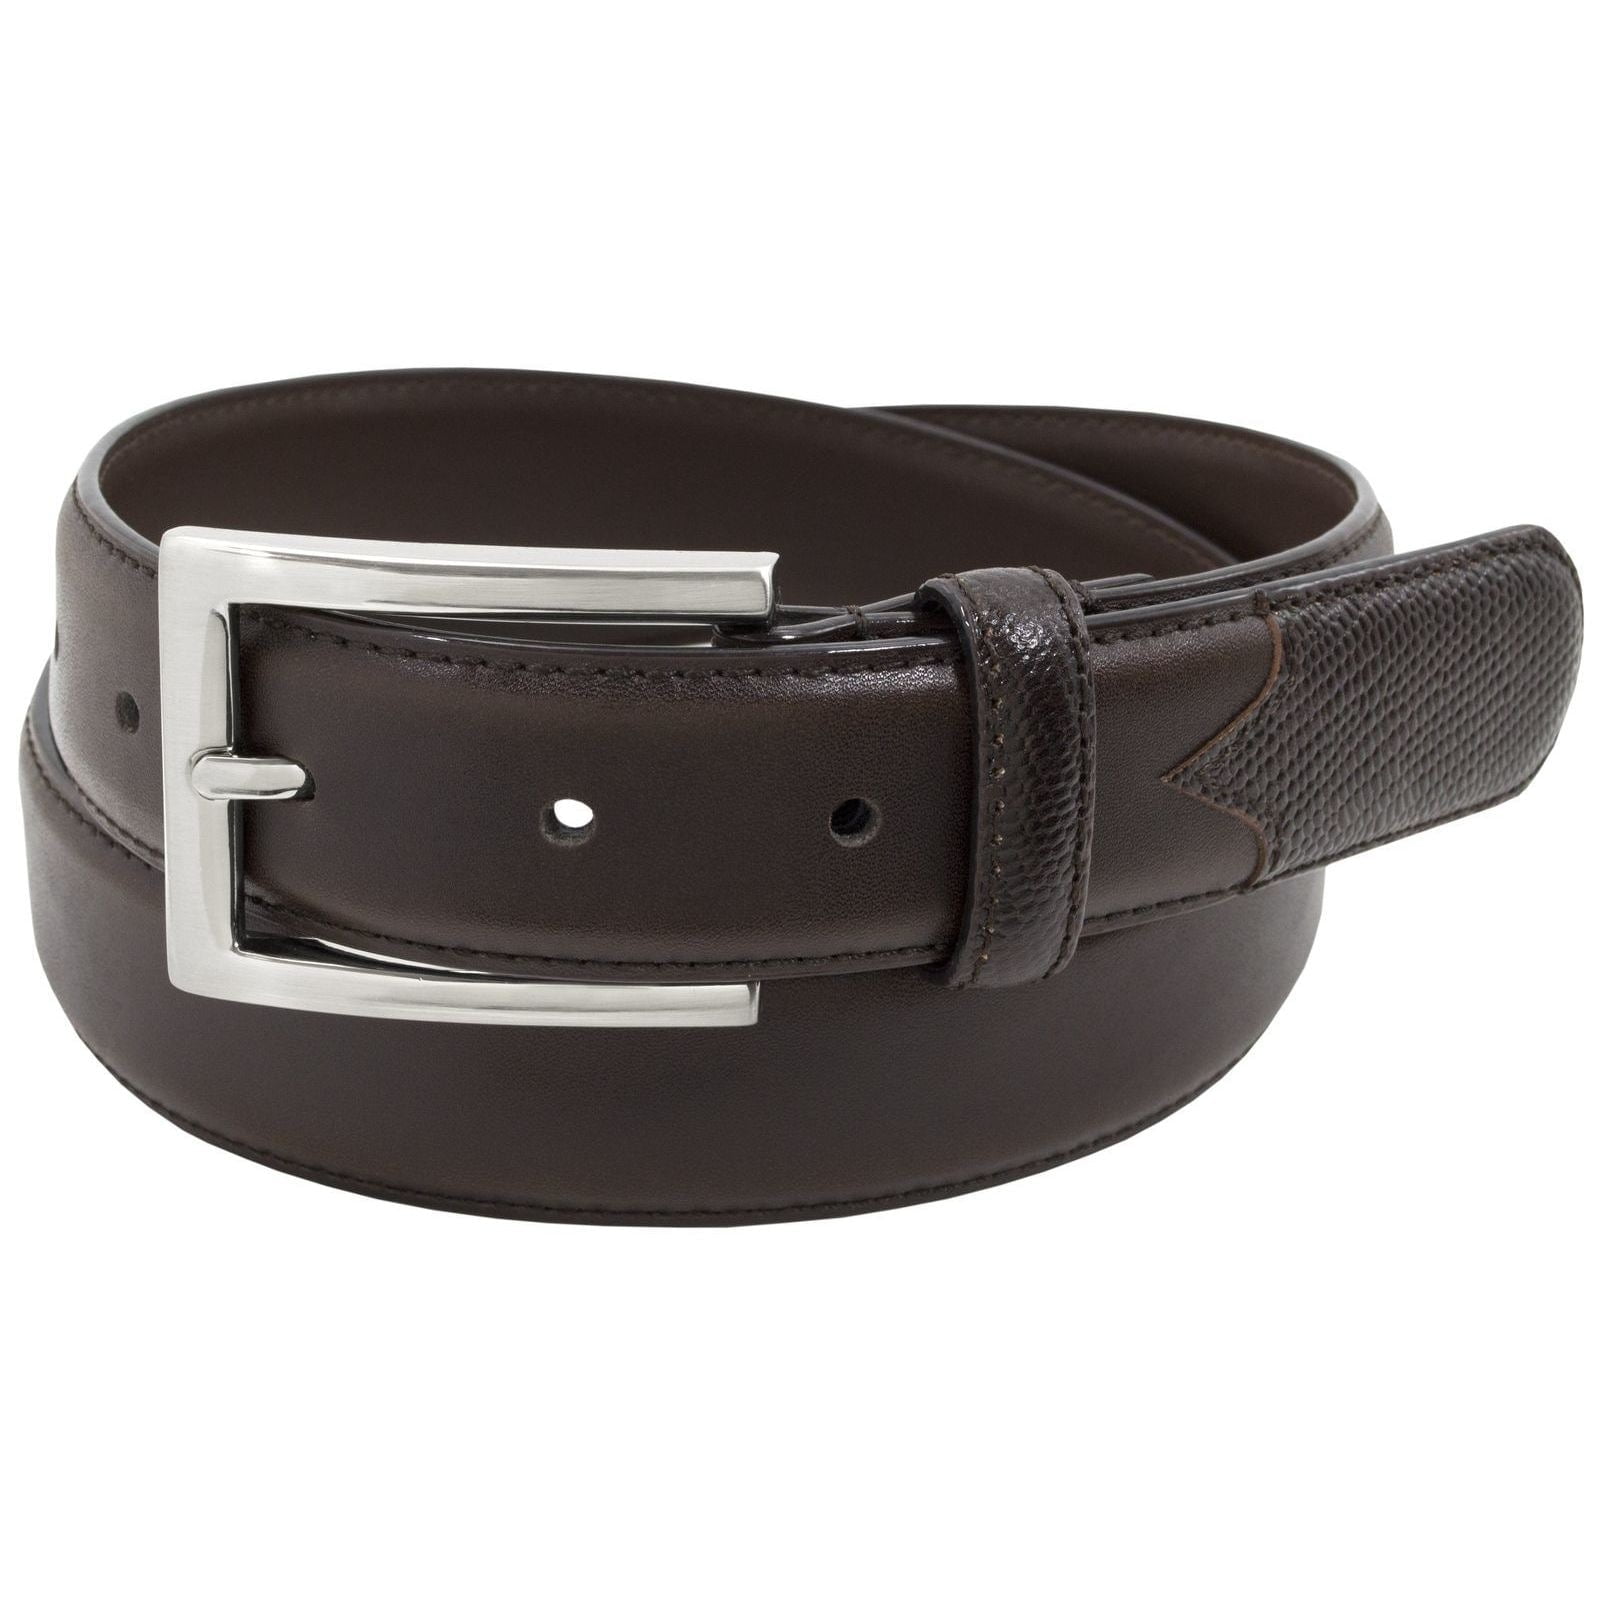 Classic Oil-tanned Genuine Leather Casual Jean Belt for Men Sizes 32-40!